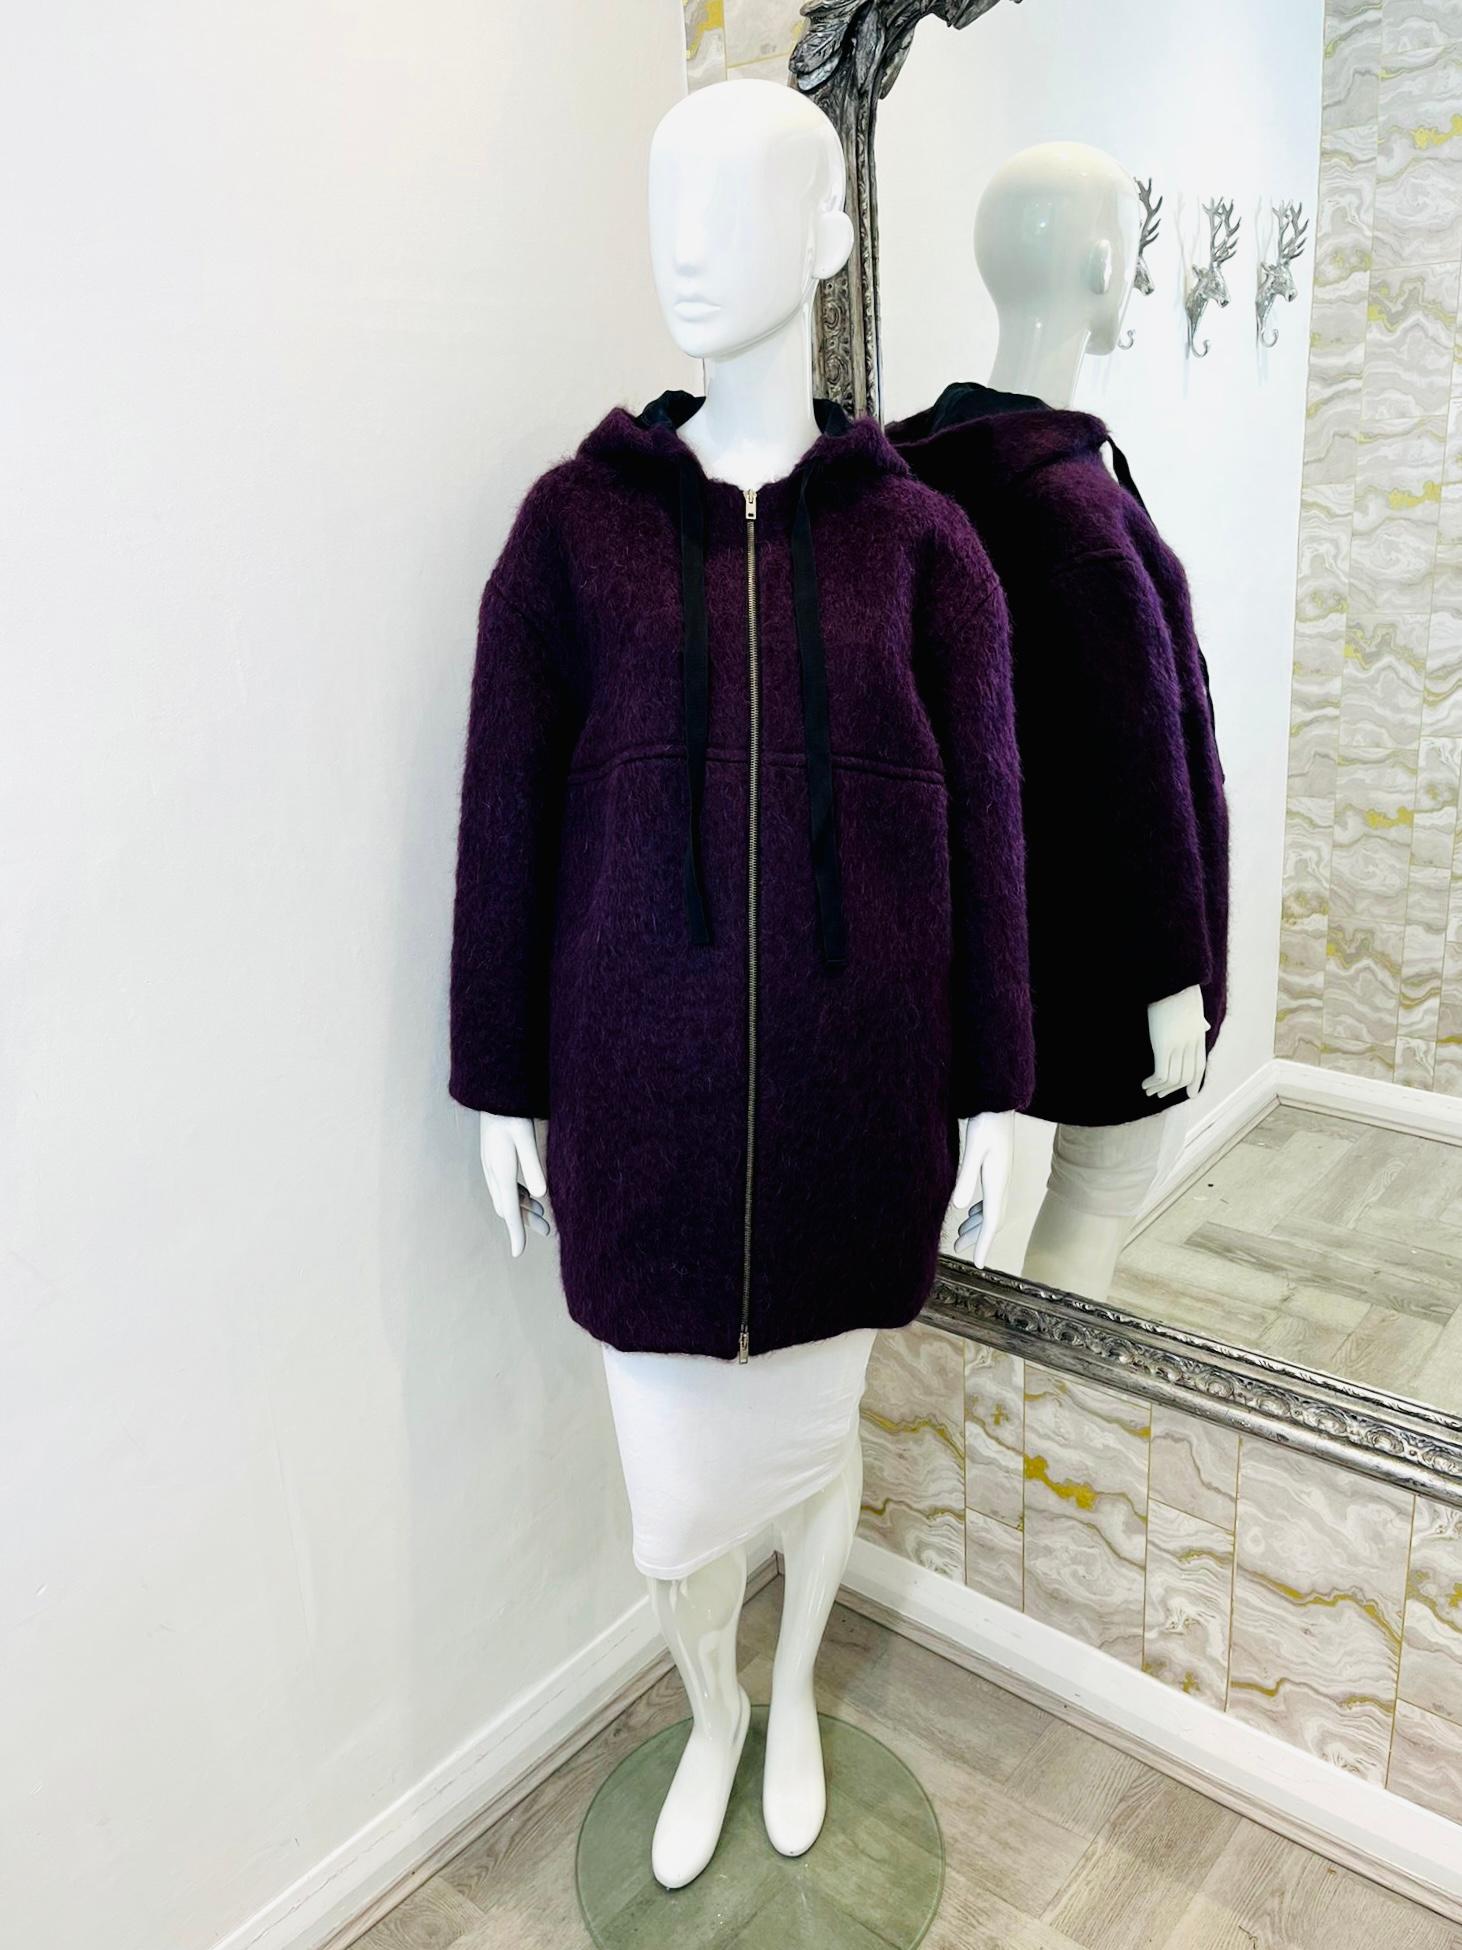  Marni Mohair & Virgin Wool Hooded Coat

Burgundy coat with pull tab canvas ribbon in black to the hood and zipper up closure.

 Size - 40IT

Condition - Excellent

Composition - 62% Mohair, 23% Virgin Wool, 15% Polyamide, Lining 100% Viscose